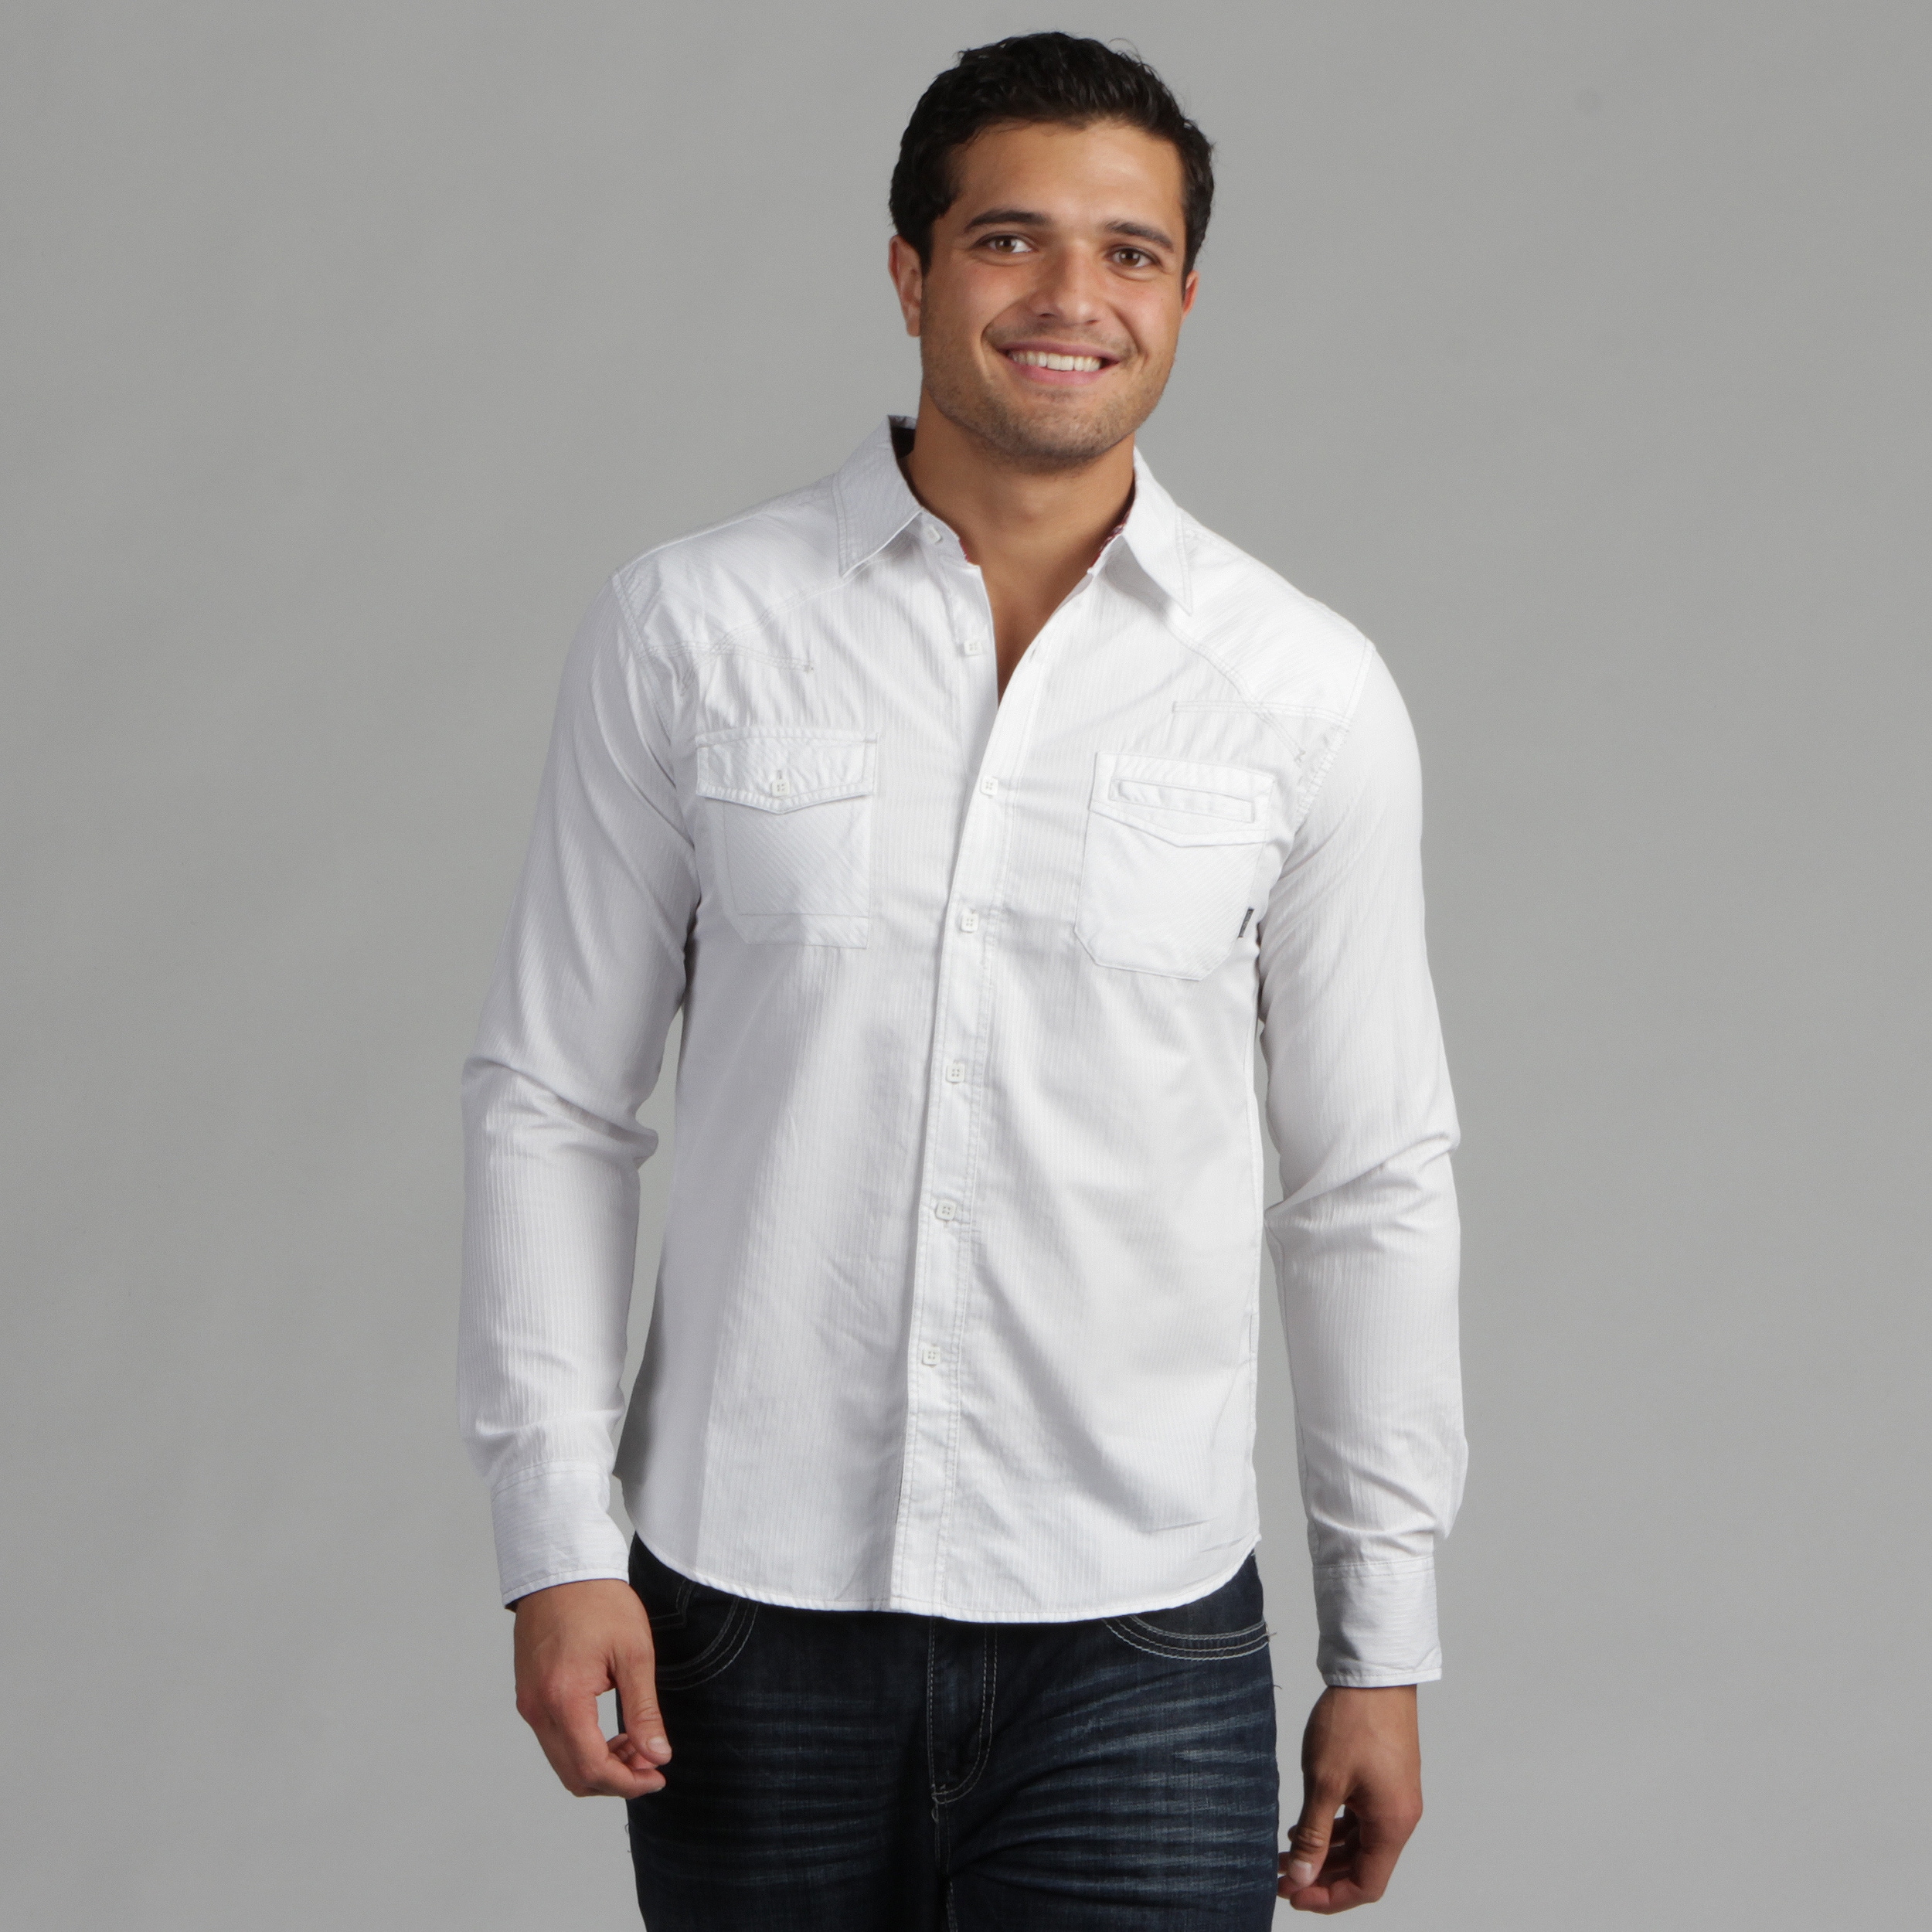 191 Unlimited Mens White Woven Shirt With Raised Stripes